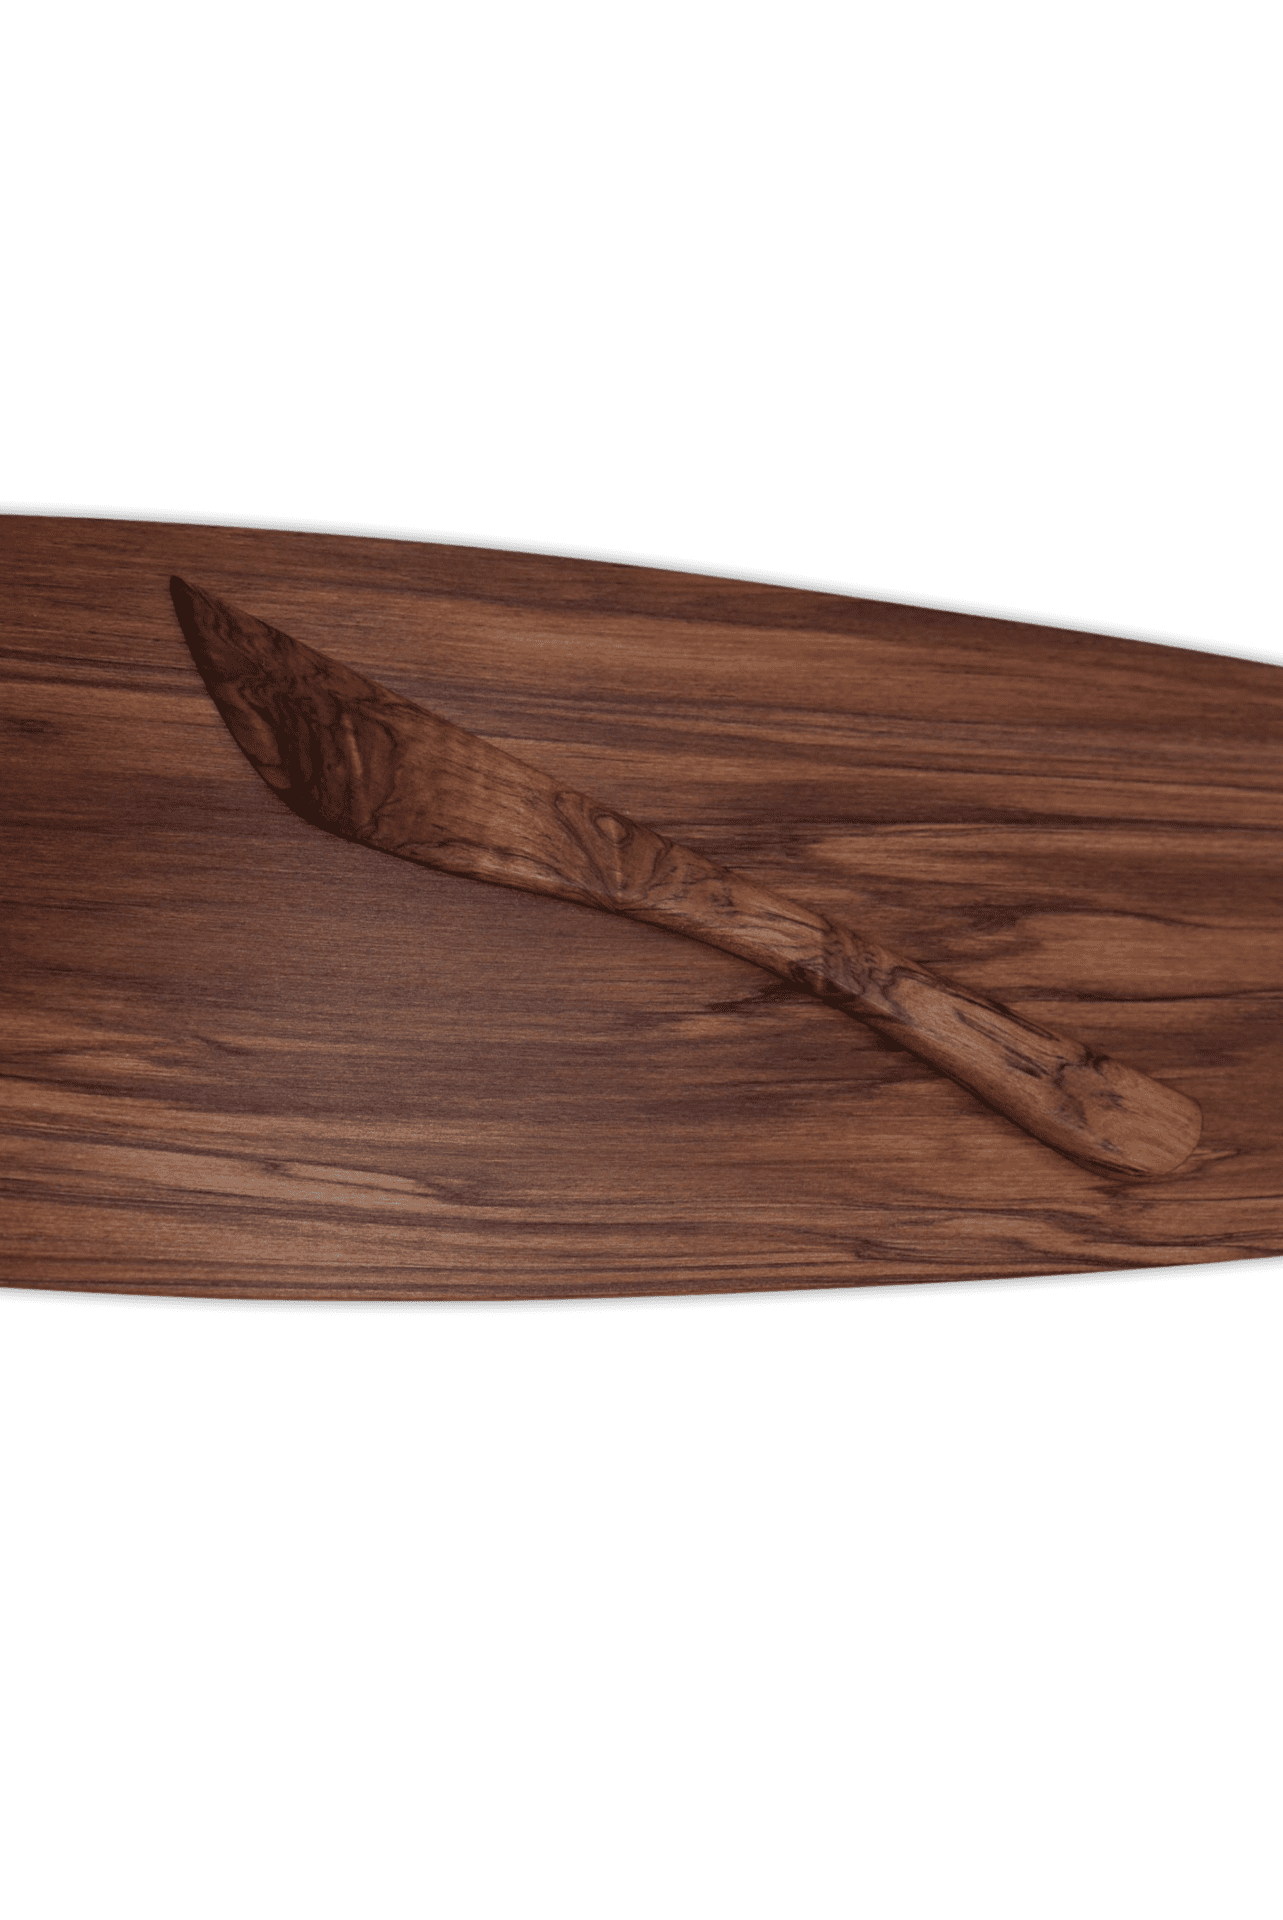 Utensil and board designed and handcrafted by Marc, Jane, and Chris on the West Coast of the South Island, New Zealand. Timber is sourced from recycled waste, ancient buried logs or sustainably managed timber.